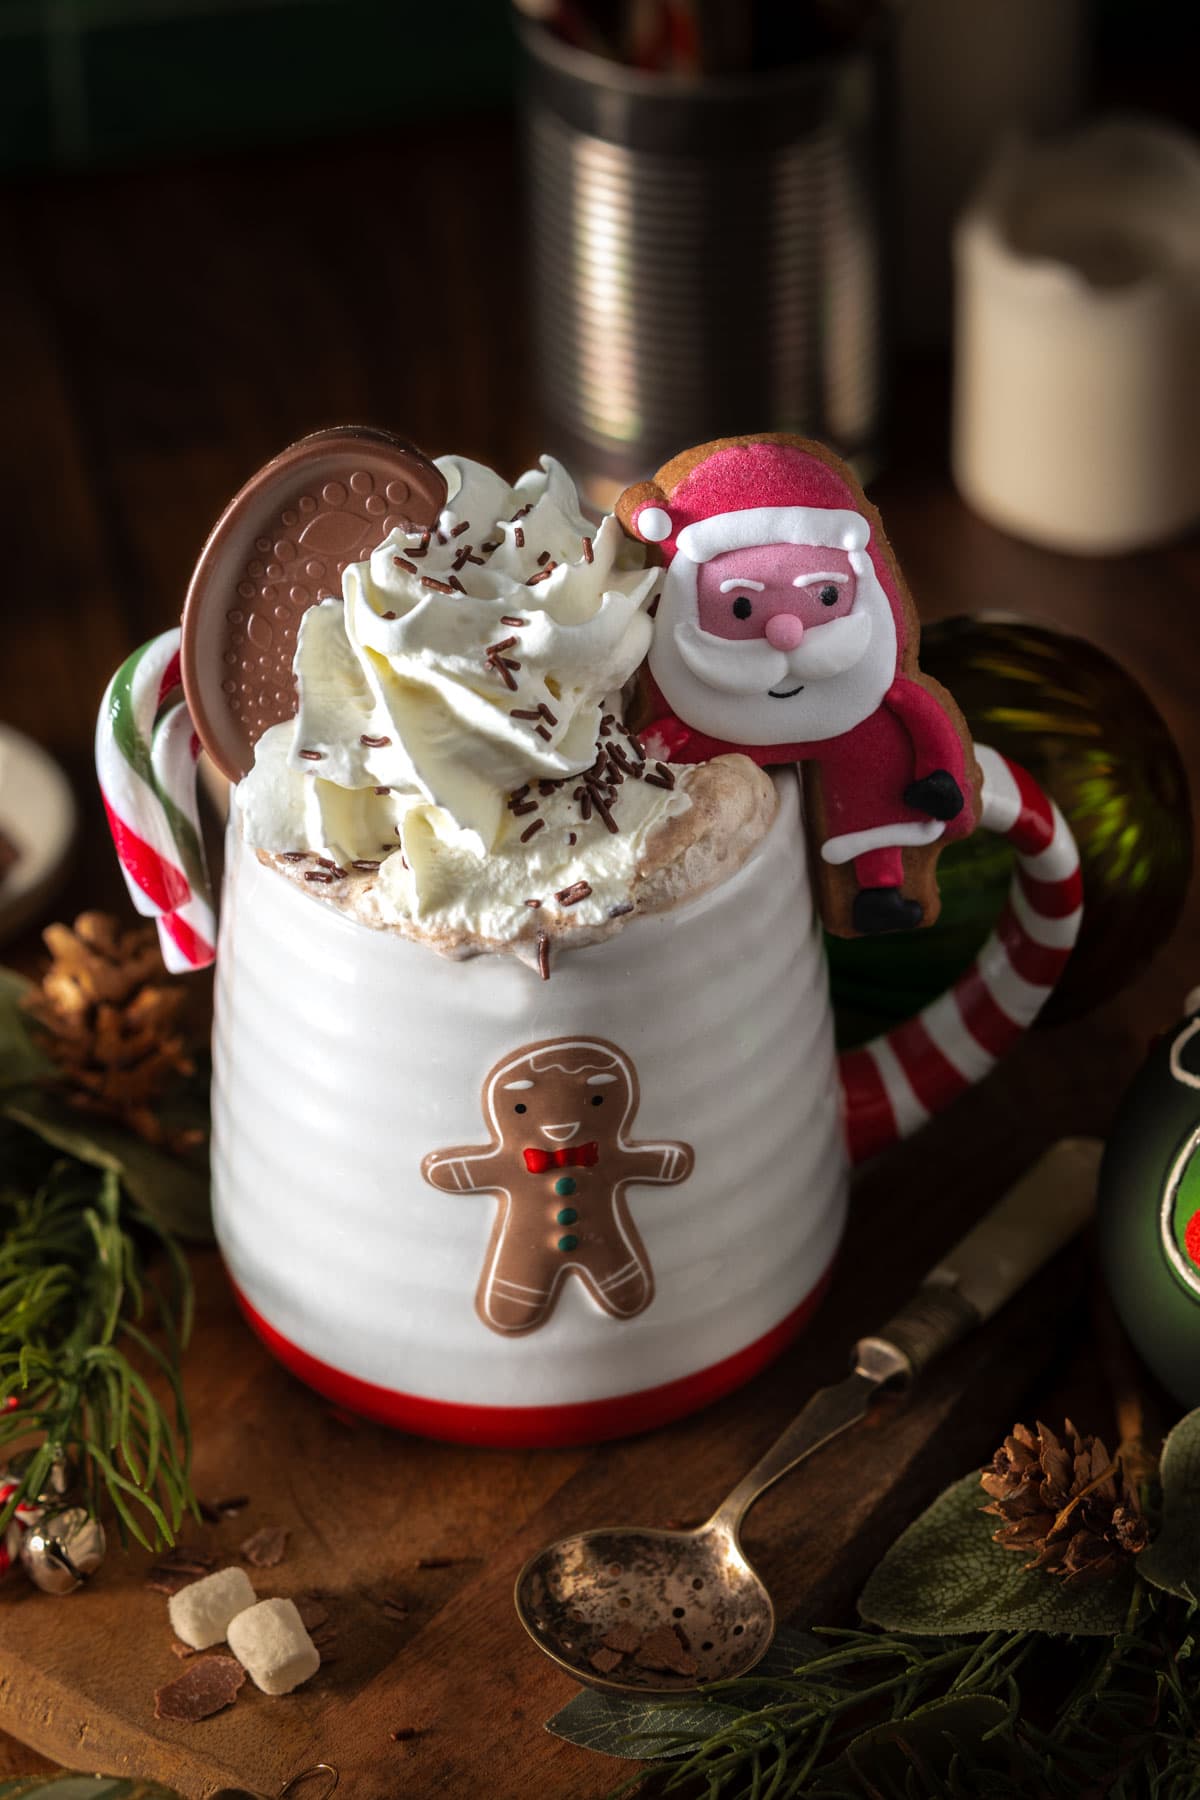 Hot chocolate topped with whipped cream in a Christmas mug with a gingerbread man on the front - Food Photography and Styling by Lou Carruthers, Crumbs and Corkscrews